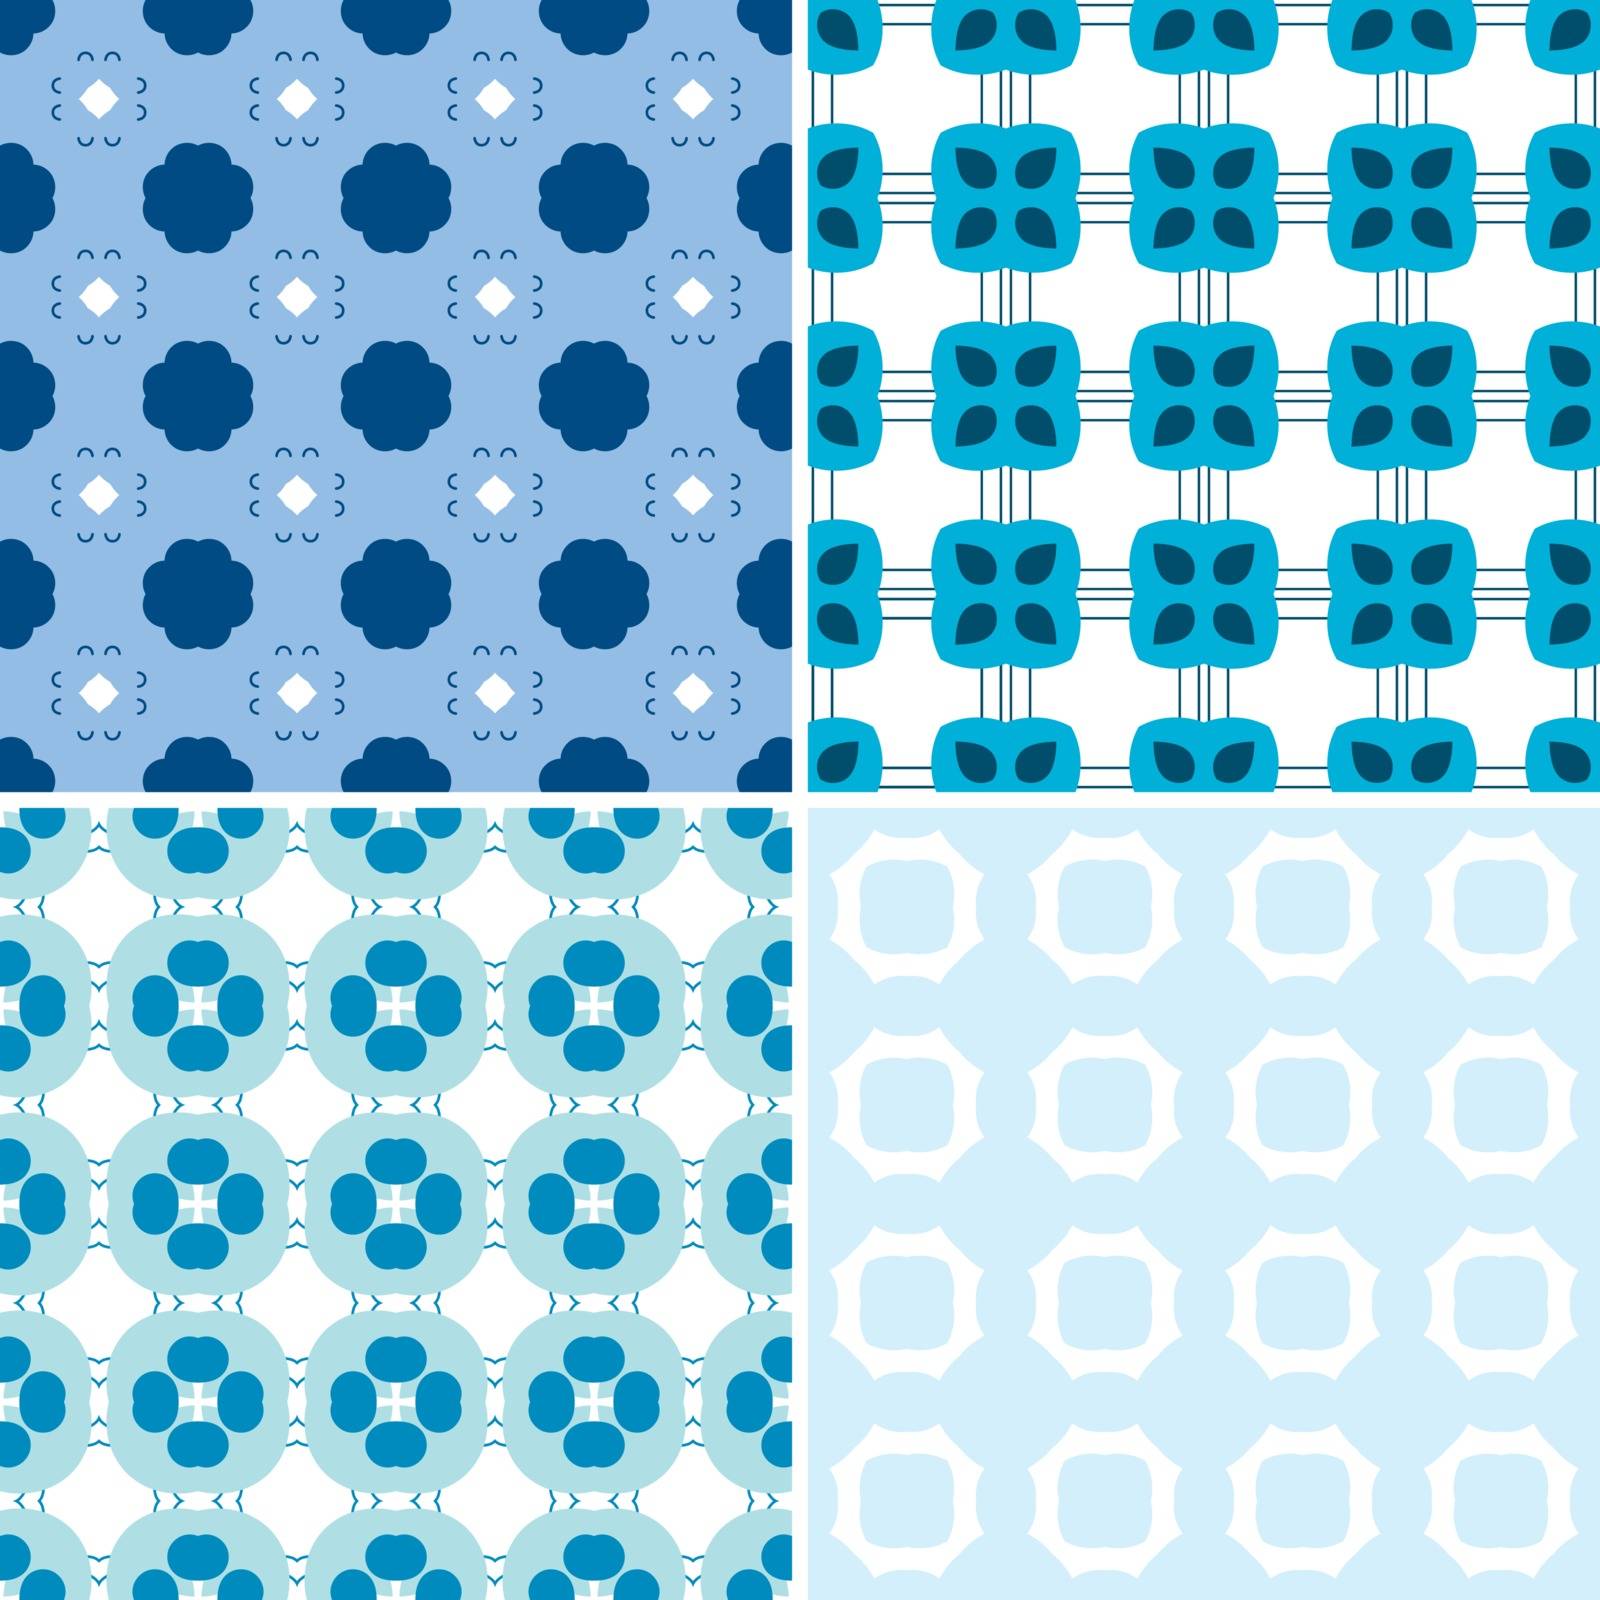 Seamless patterns by nahhan